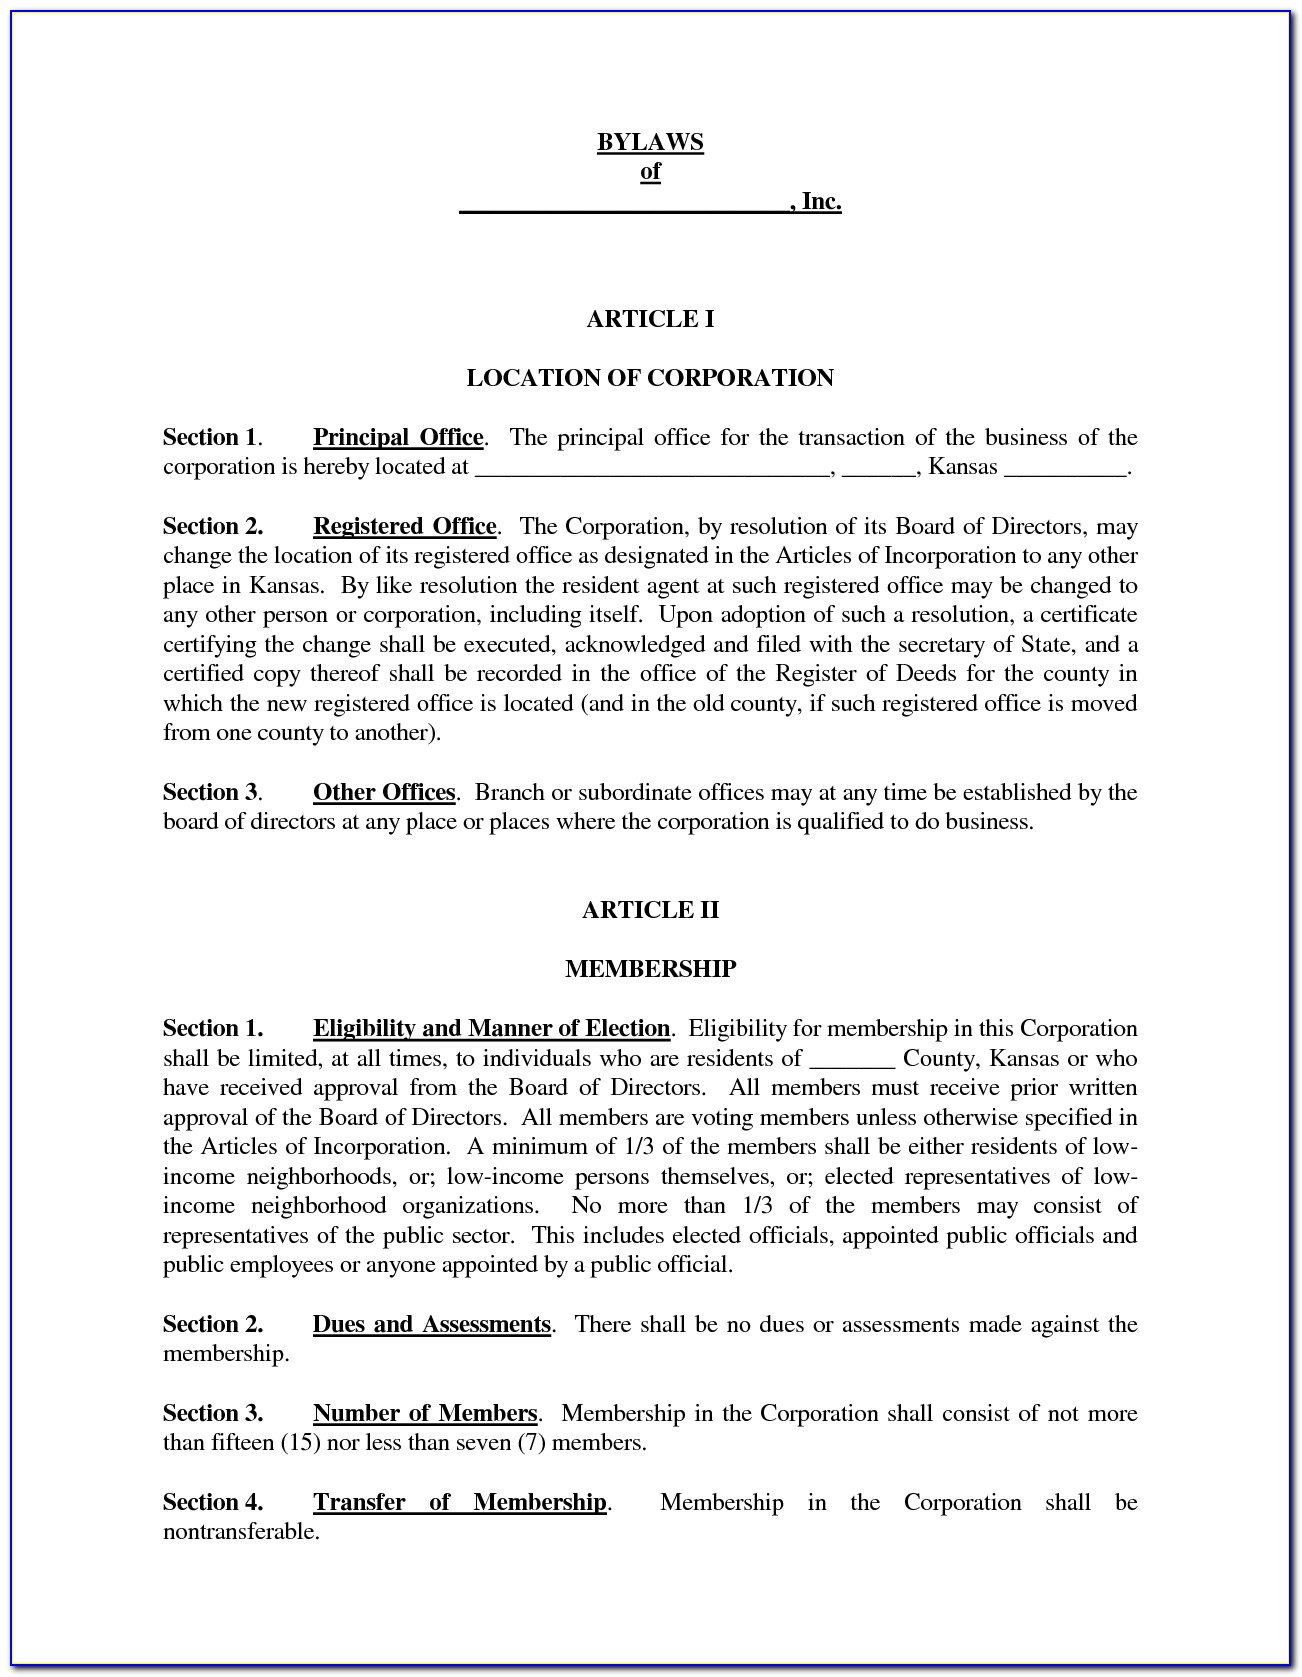 Organization Constitution And Bylaws Template